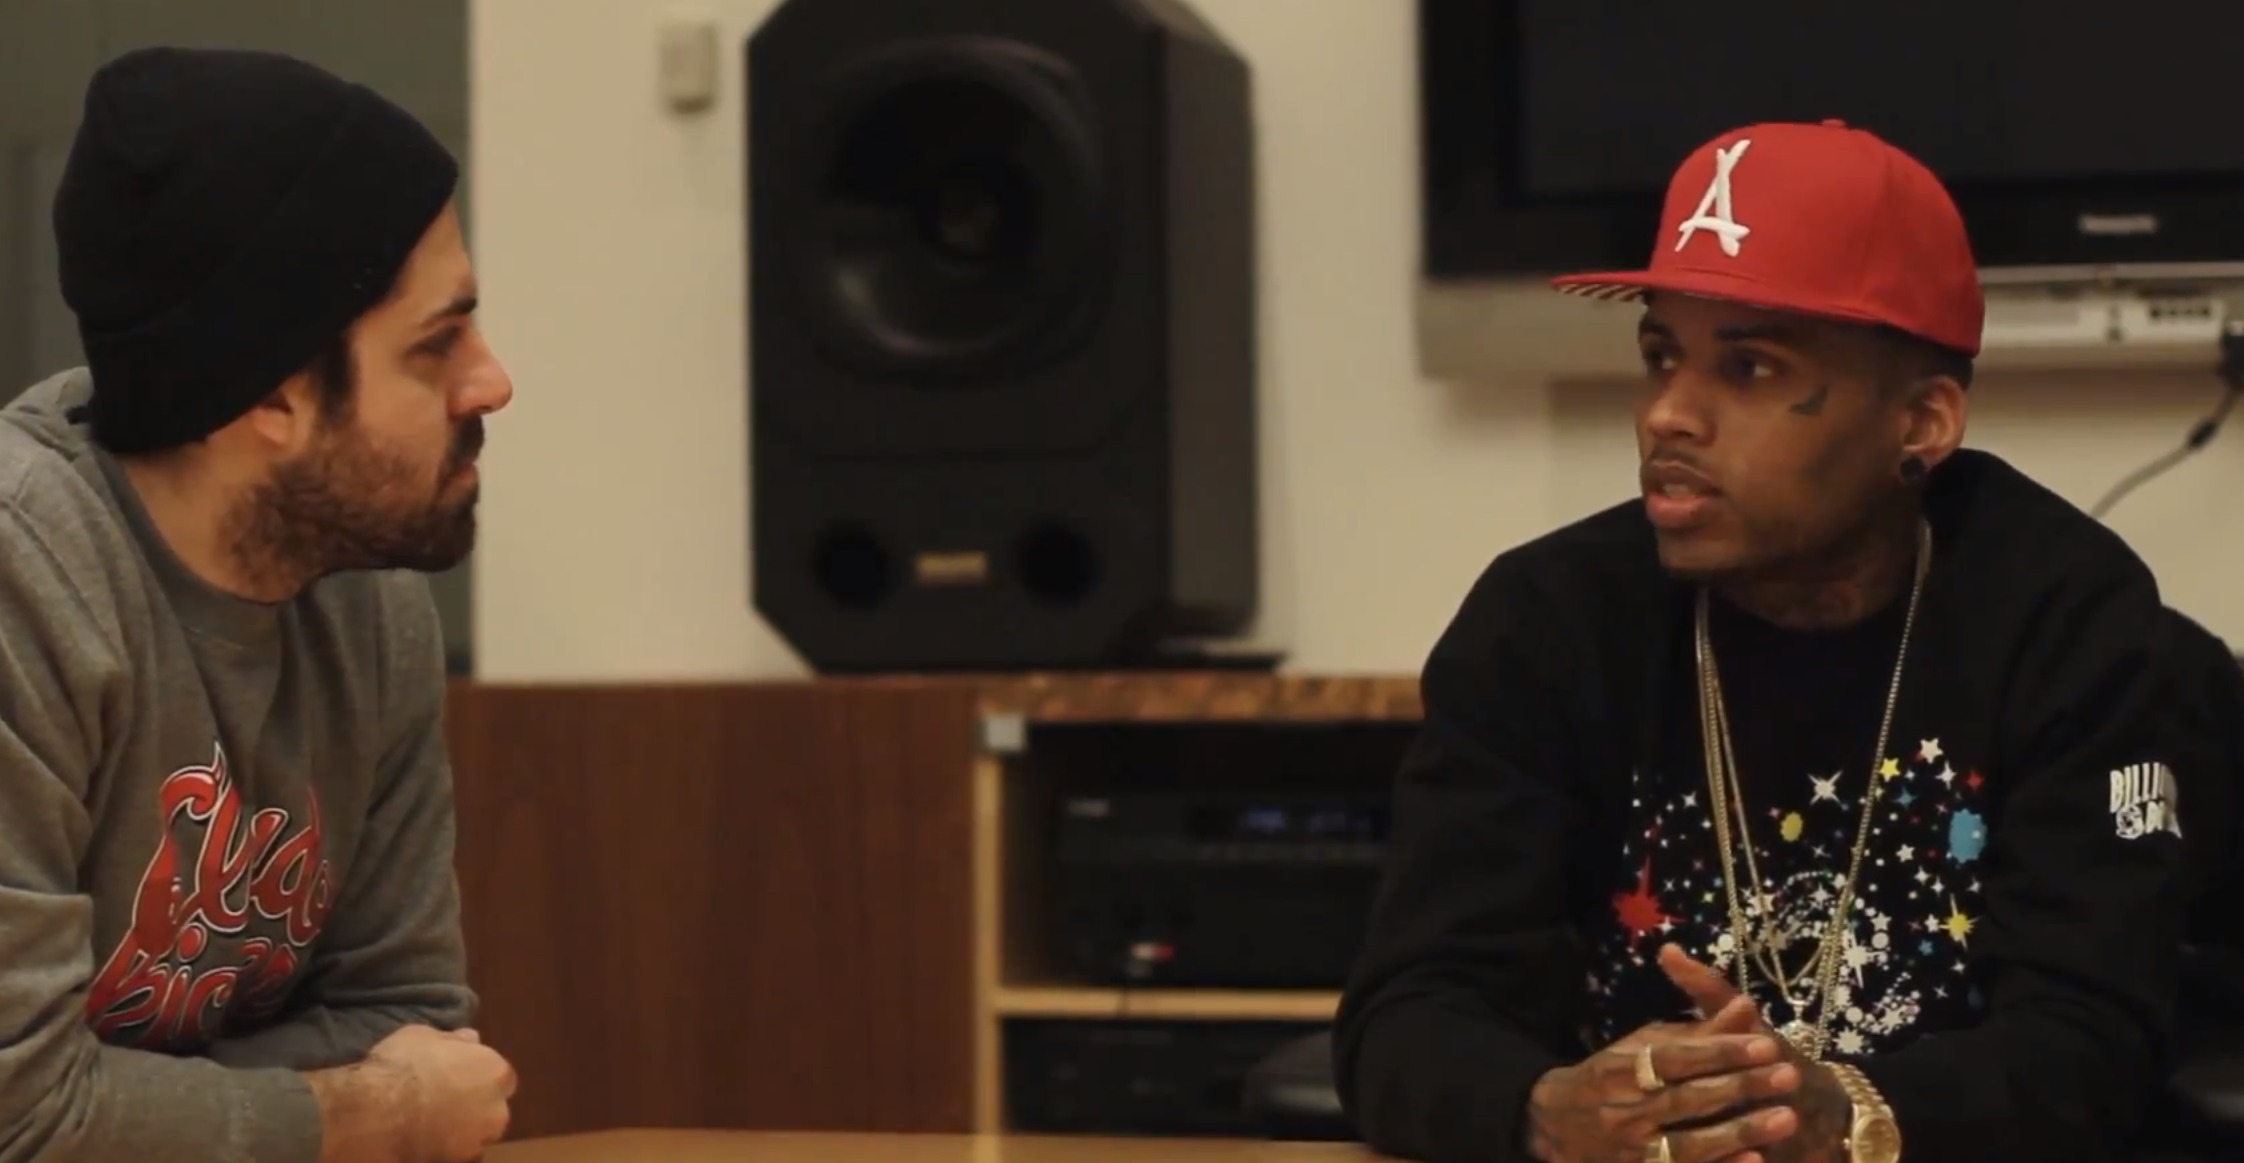 Screen-shot-2013-02-28-at-1.04.37-AM Kid Ink talks about his tattoos, his first time smoking was with Nipsey Hussle, & signing with a major label 